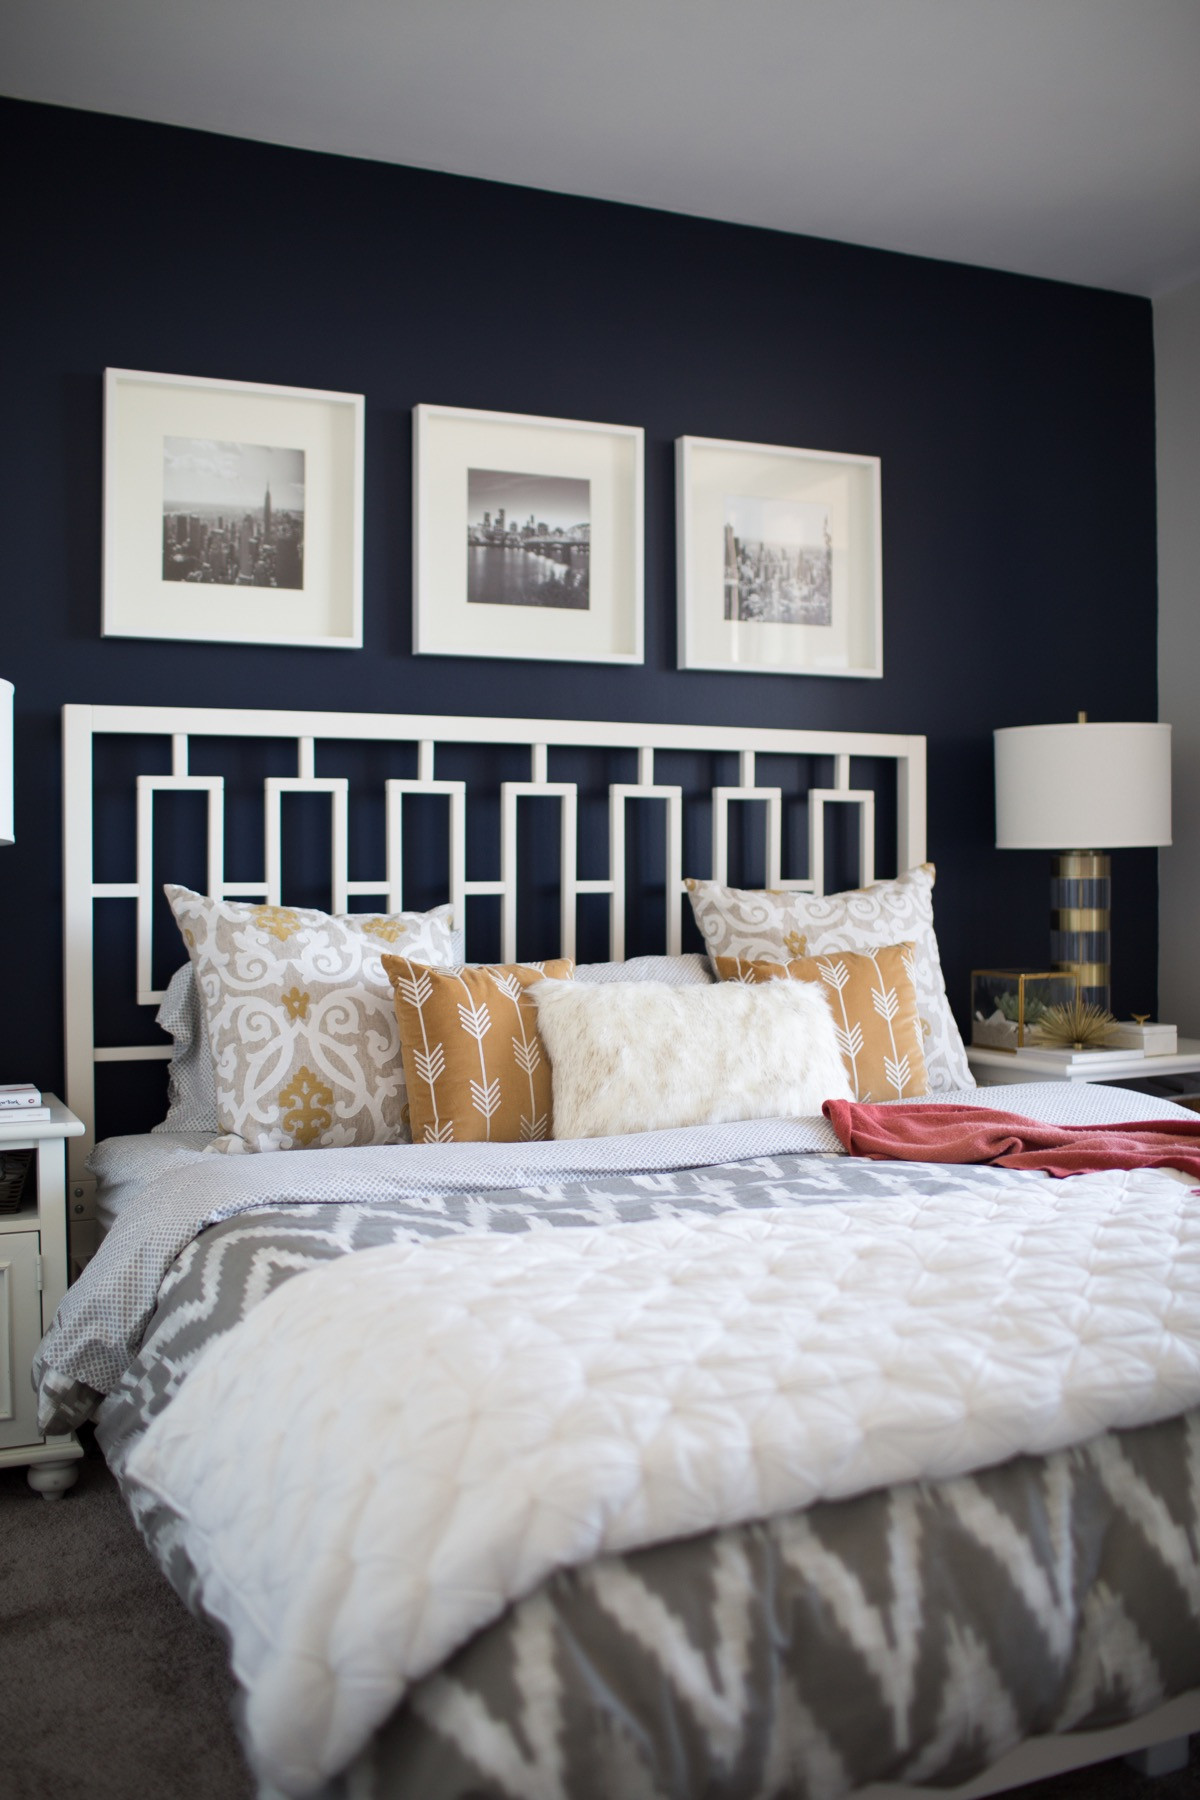 Blue Wall Art For Bedroom
 A Look Inside A Blogger s Navy and Mustard Bedroom My